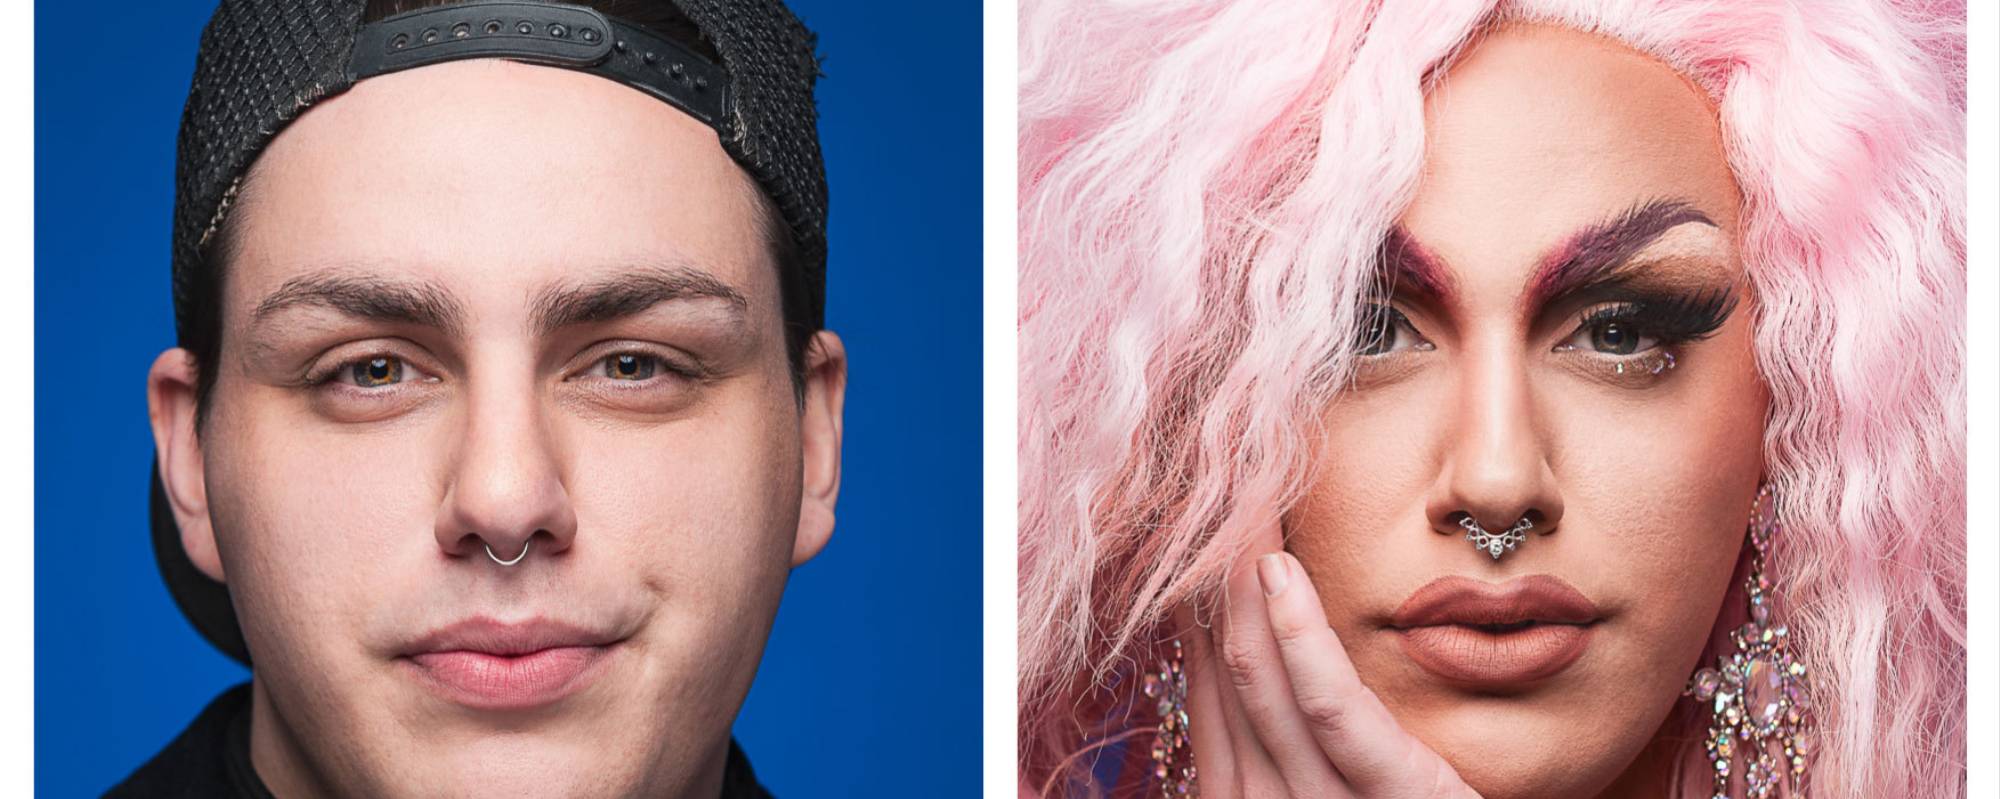 Mesmerizing Before and After Photos of Drag Transformations